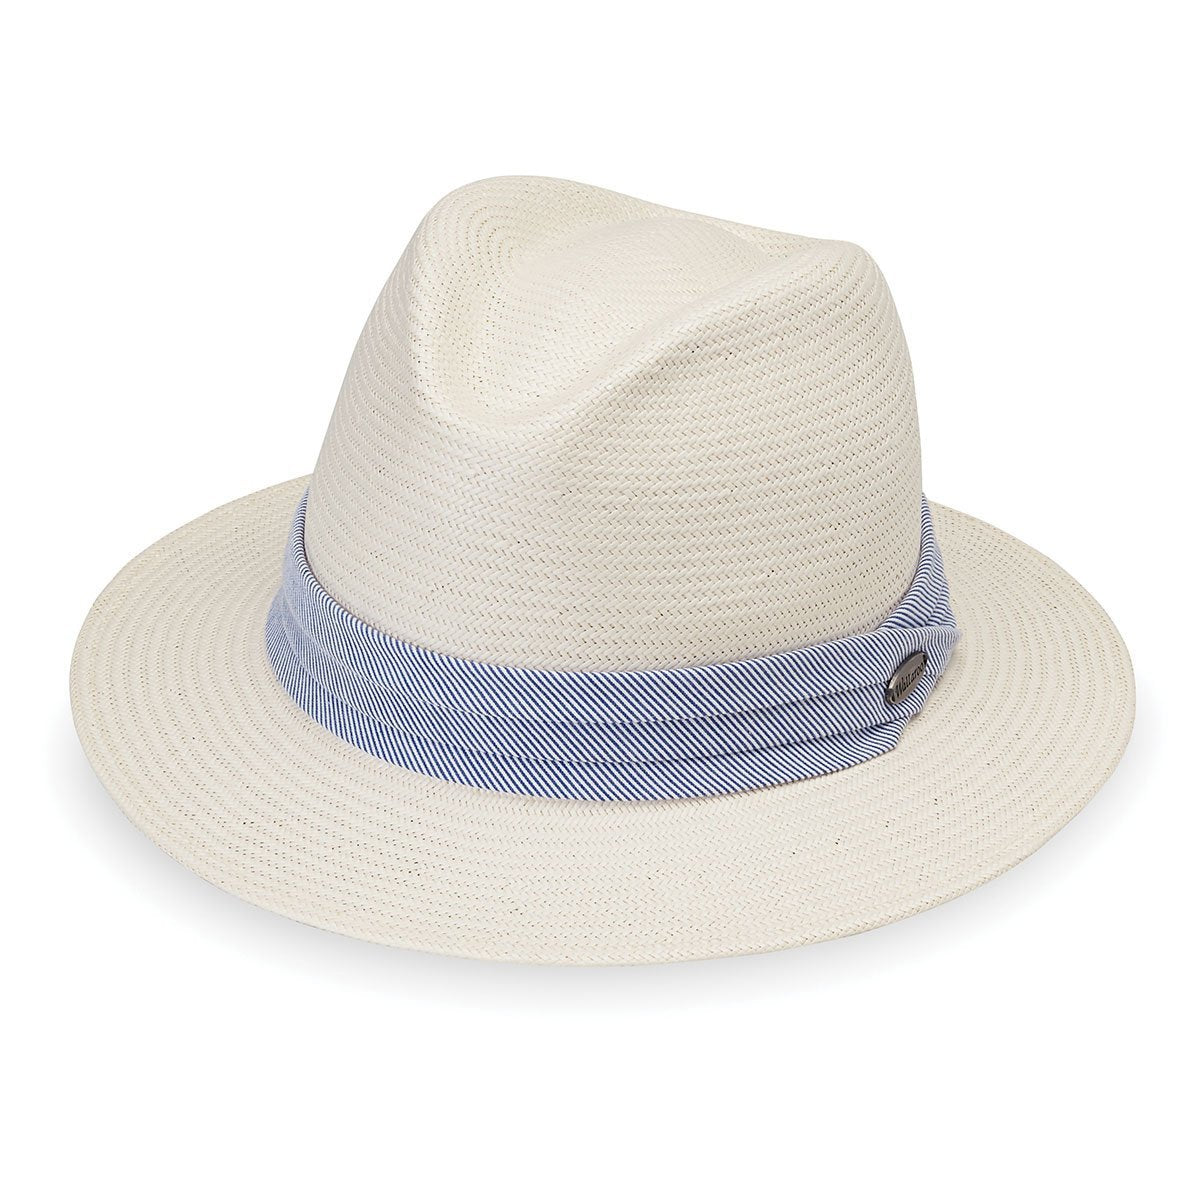 Featuring Women's Fedora Style Monterey Straw Sun Hat in Natural with Blue Pinstripe from Wallaroo